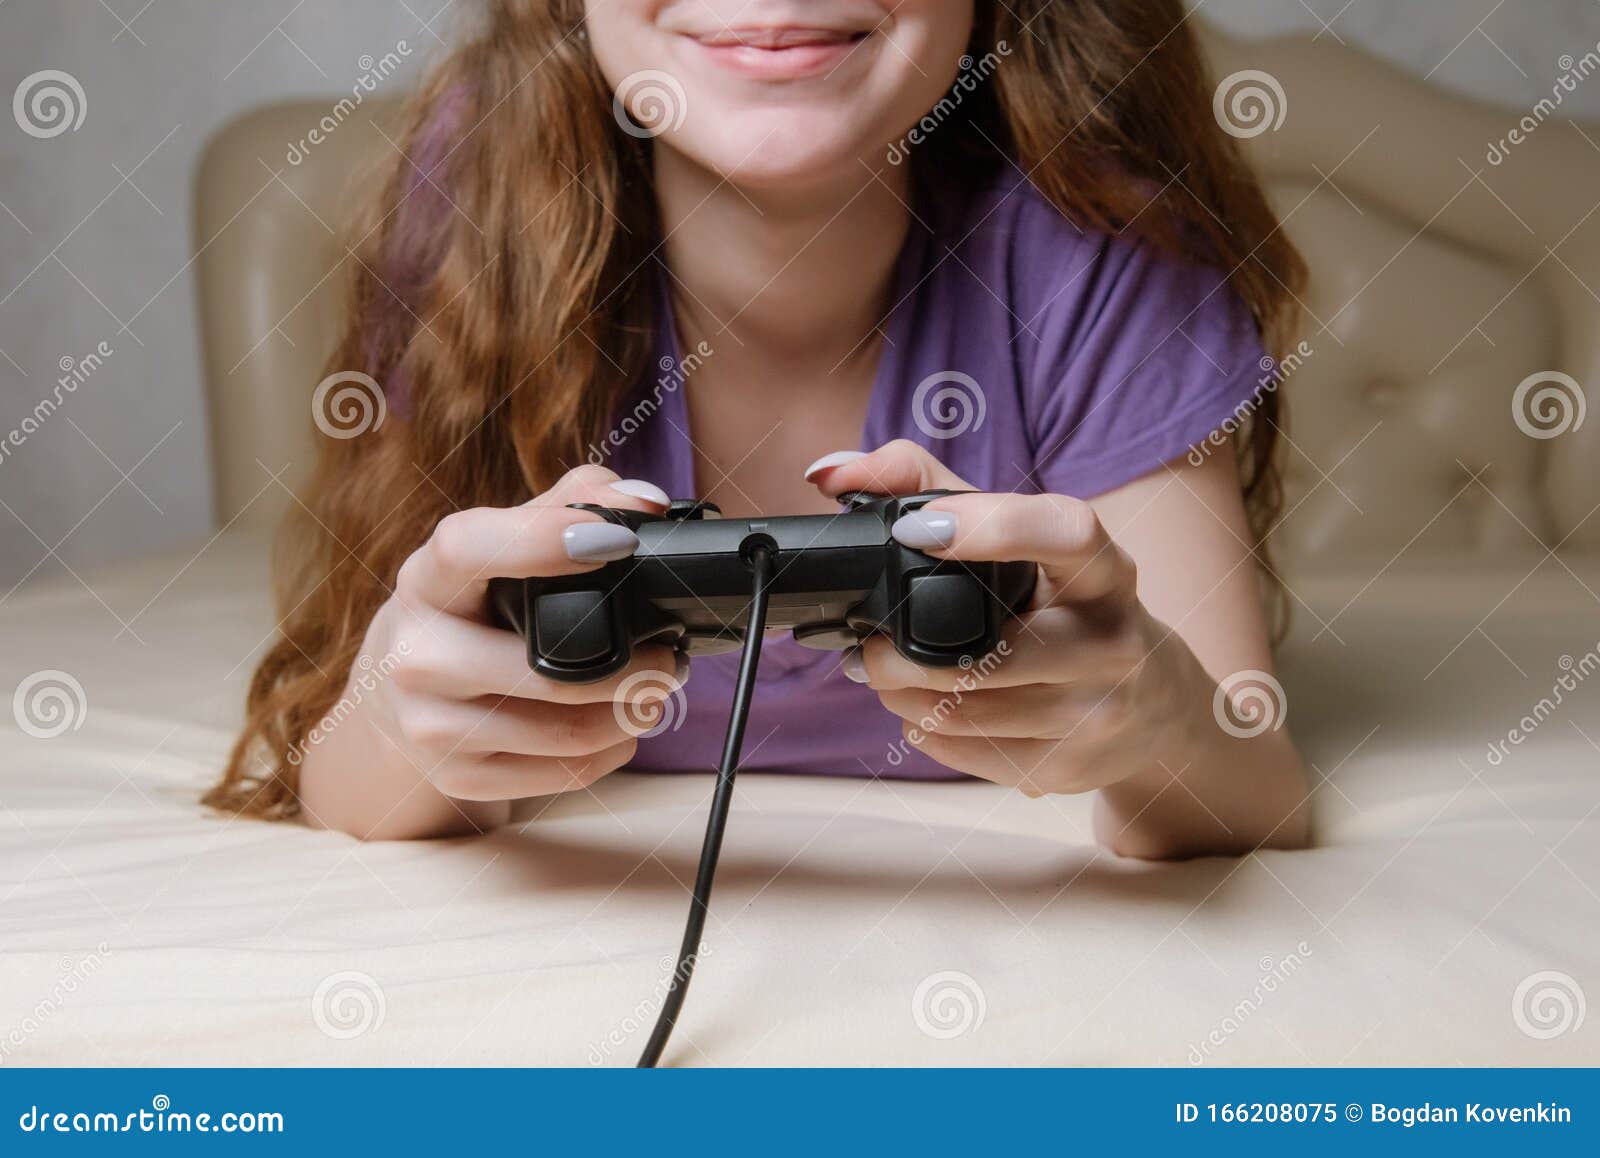 Girls Home Alone Playing Games